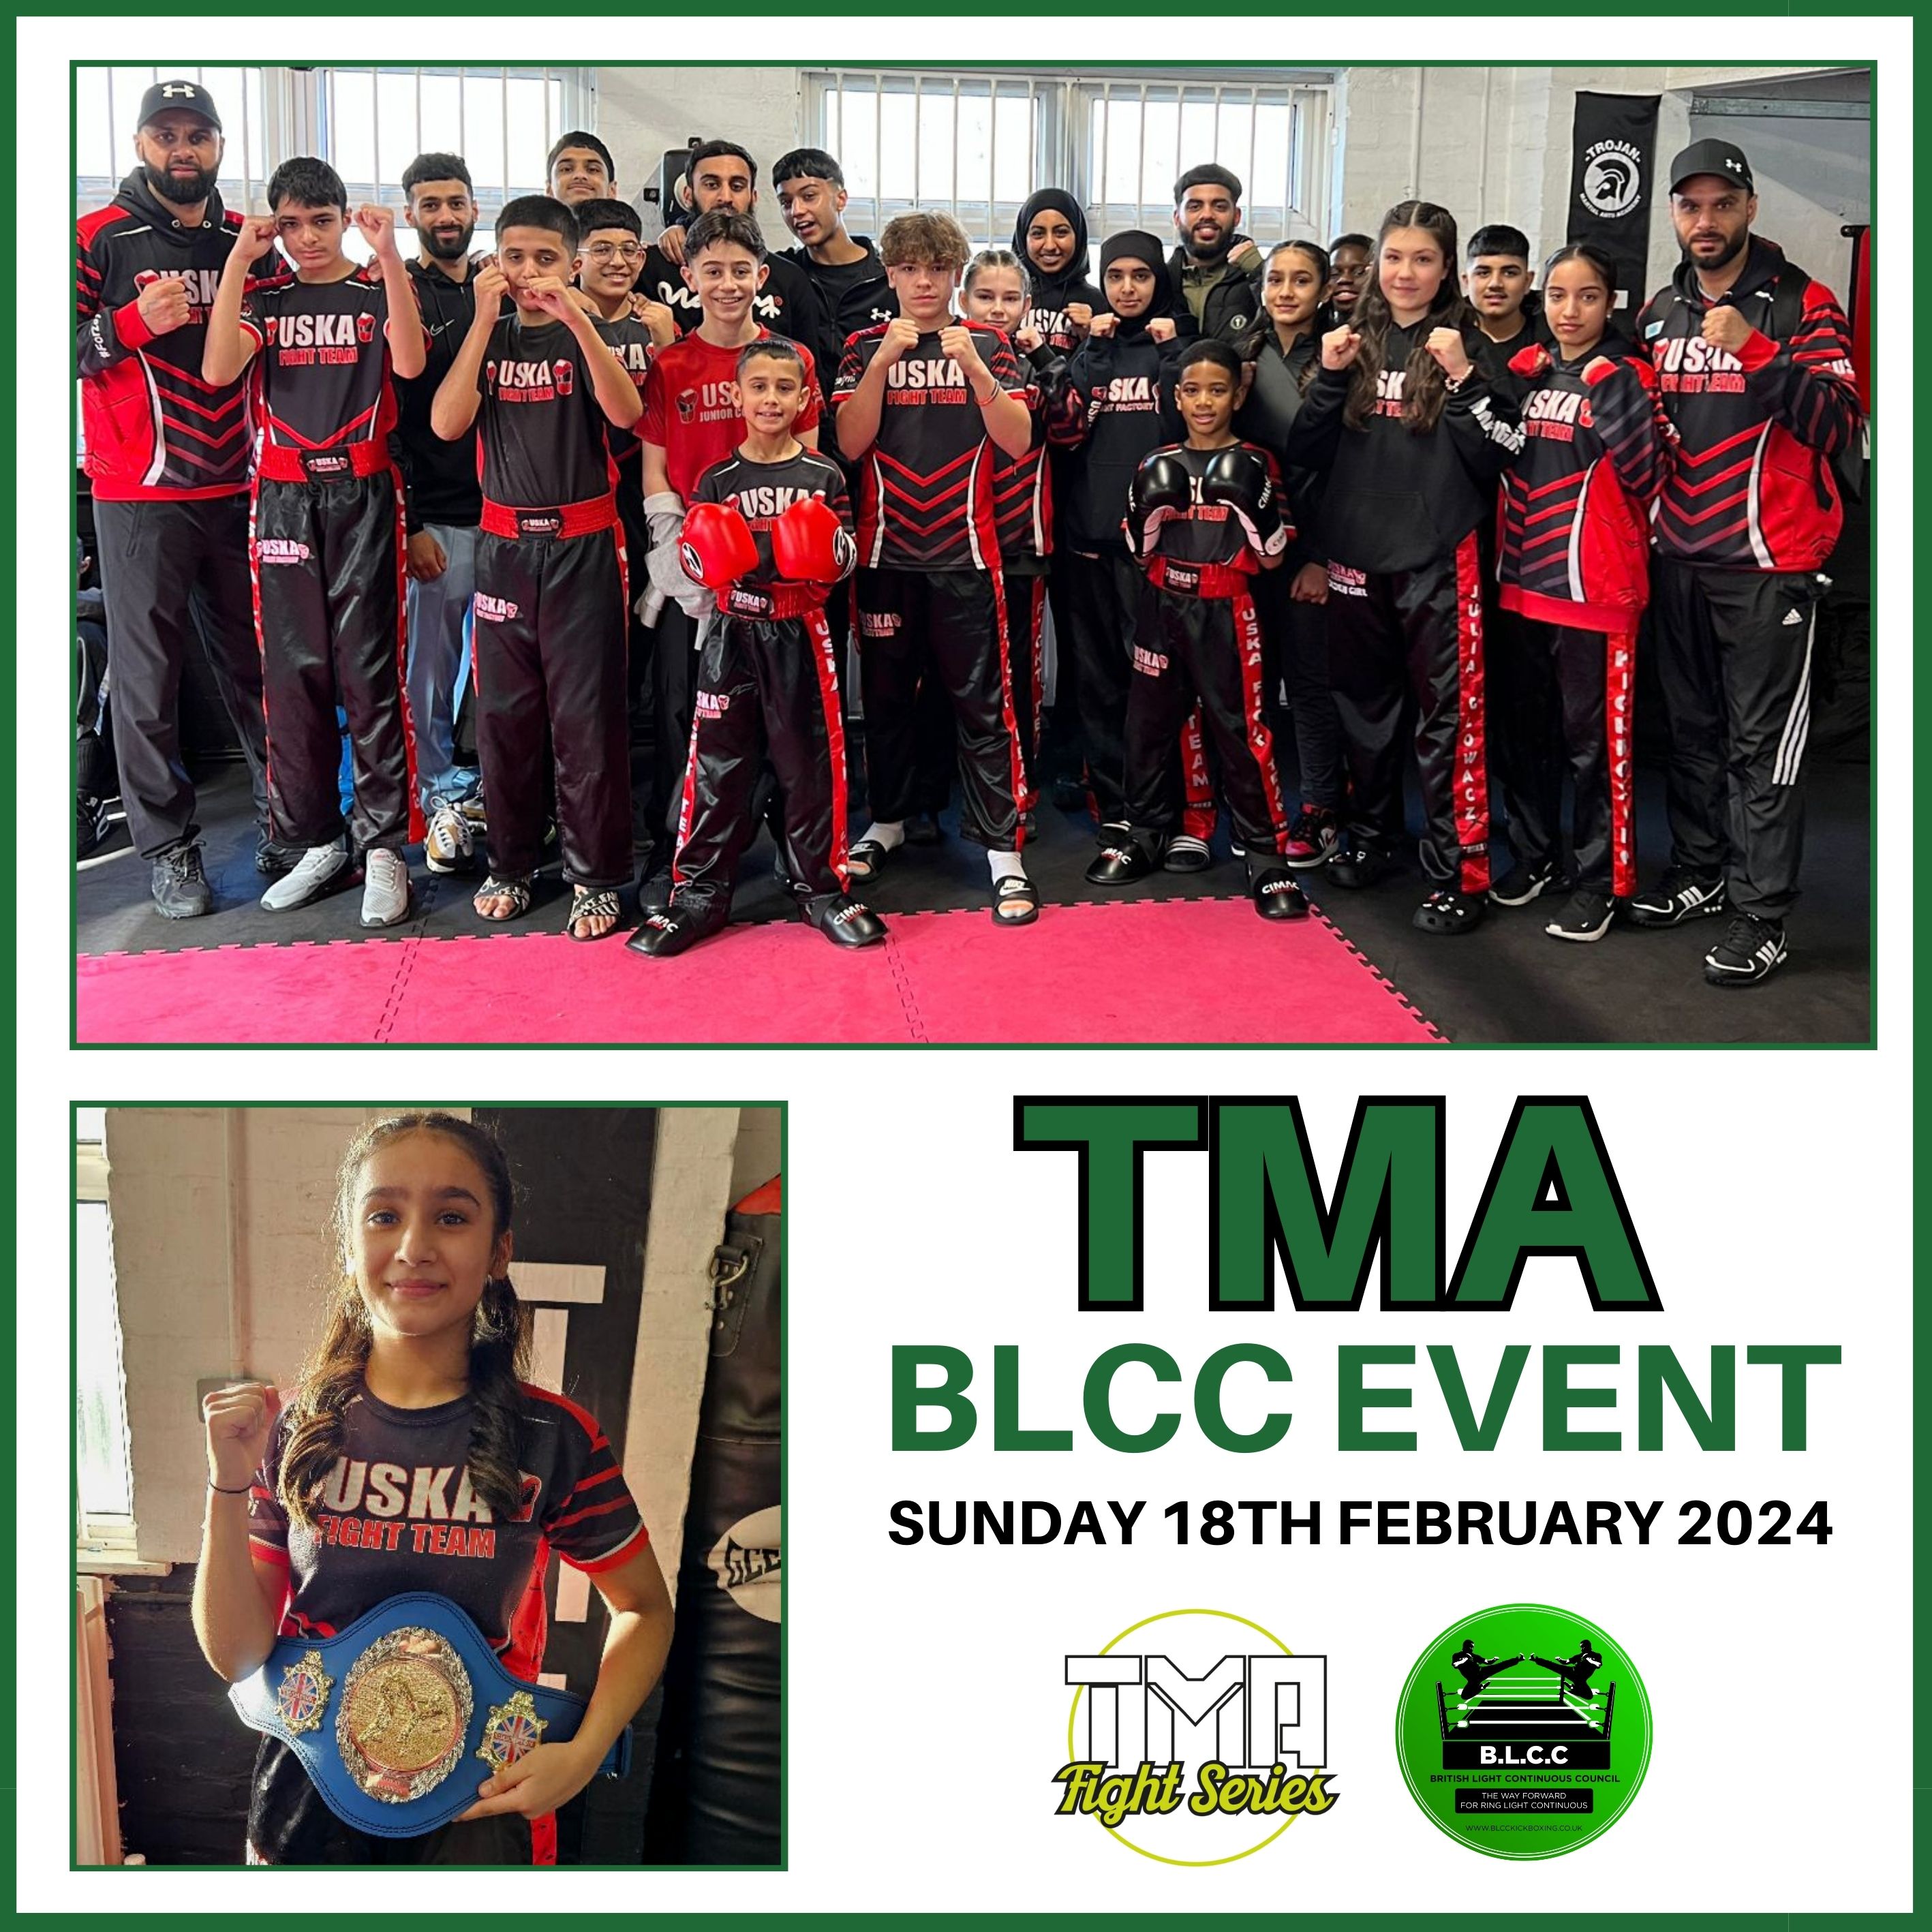 18-02-24 - Walsall TMA BLCC see's a new British Champion crowned for the USKA Fight Factory Gym!